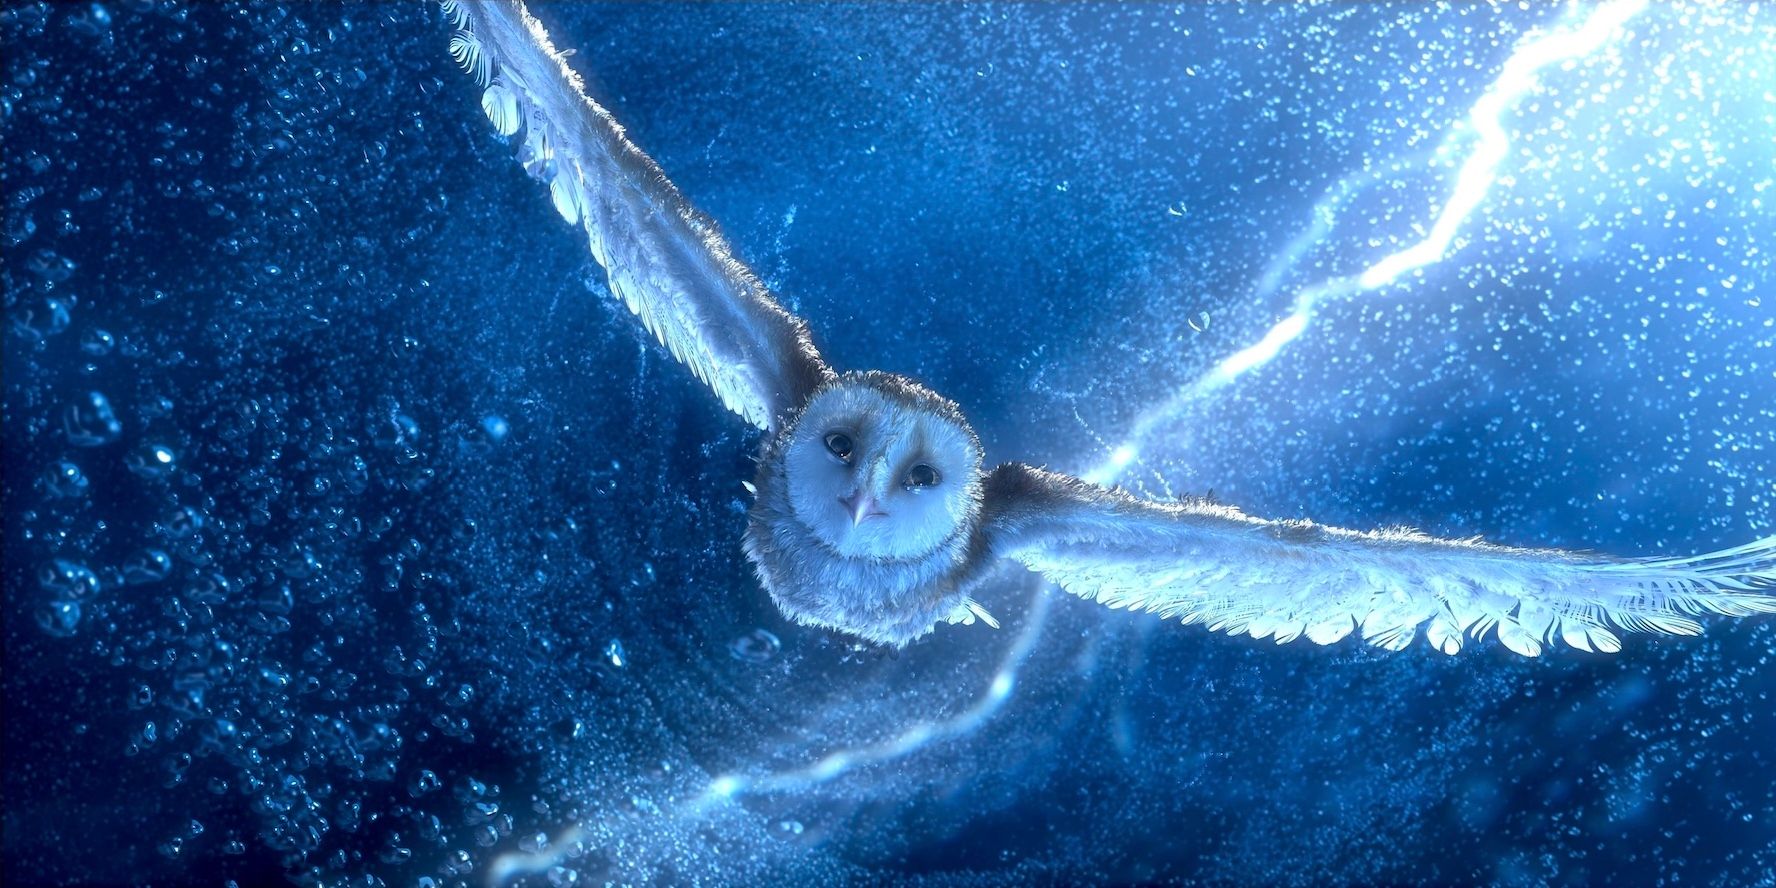 Legend of the Guardians: The Owls of Ga'Hoole ZACK SNYDER